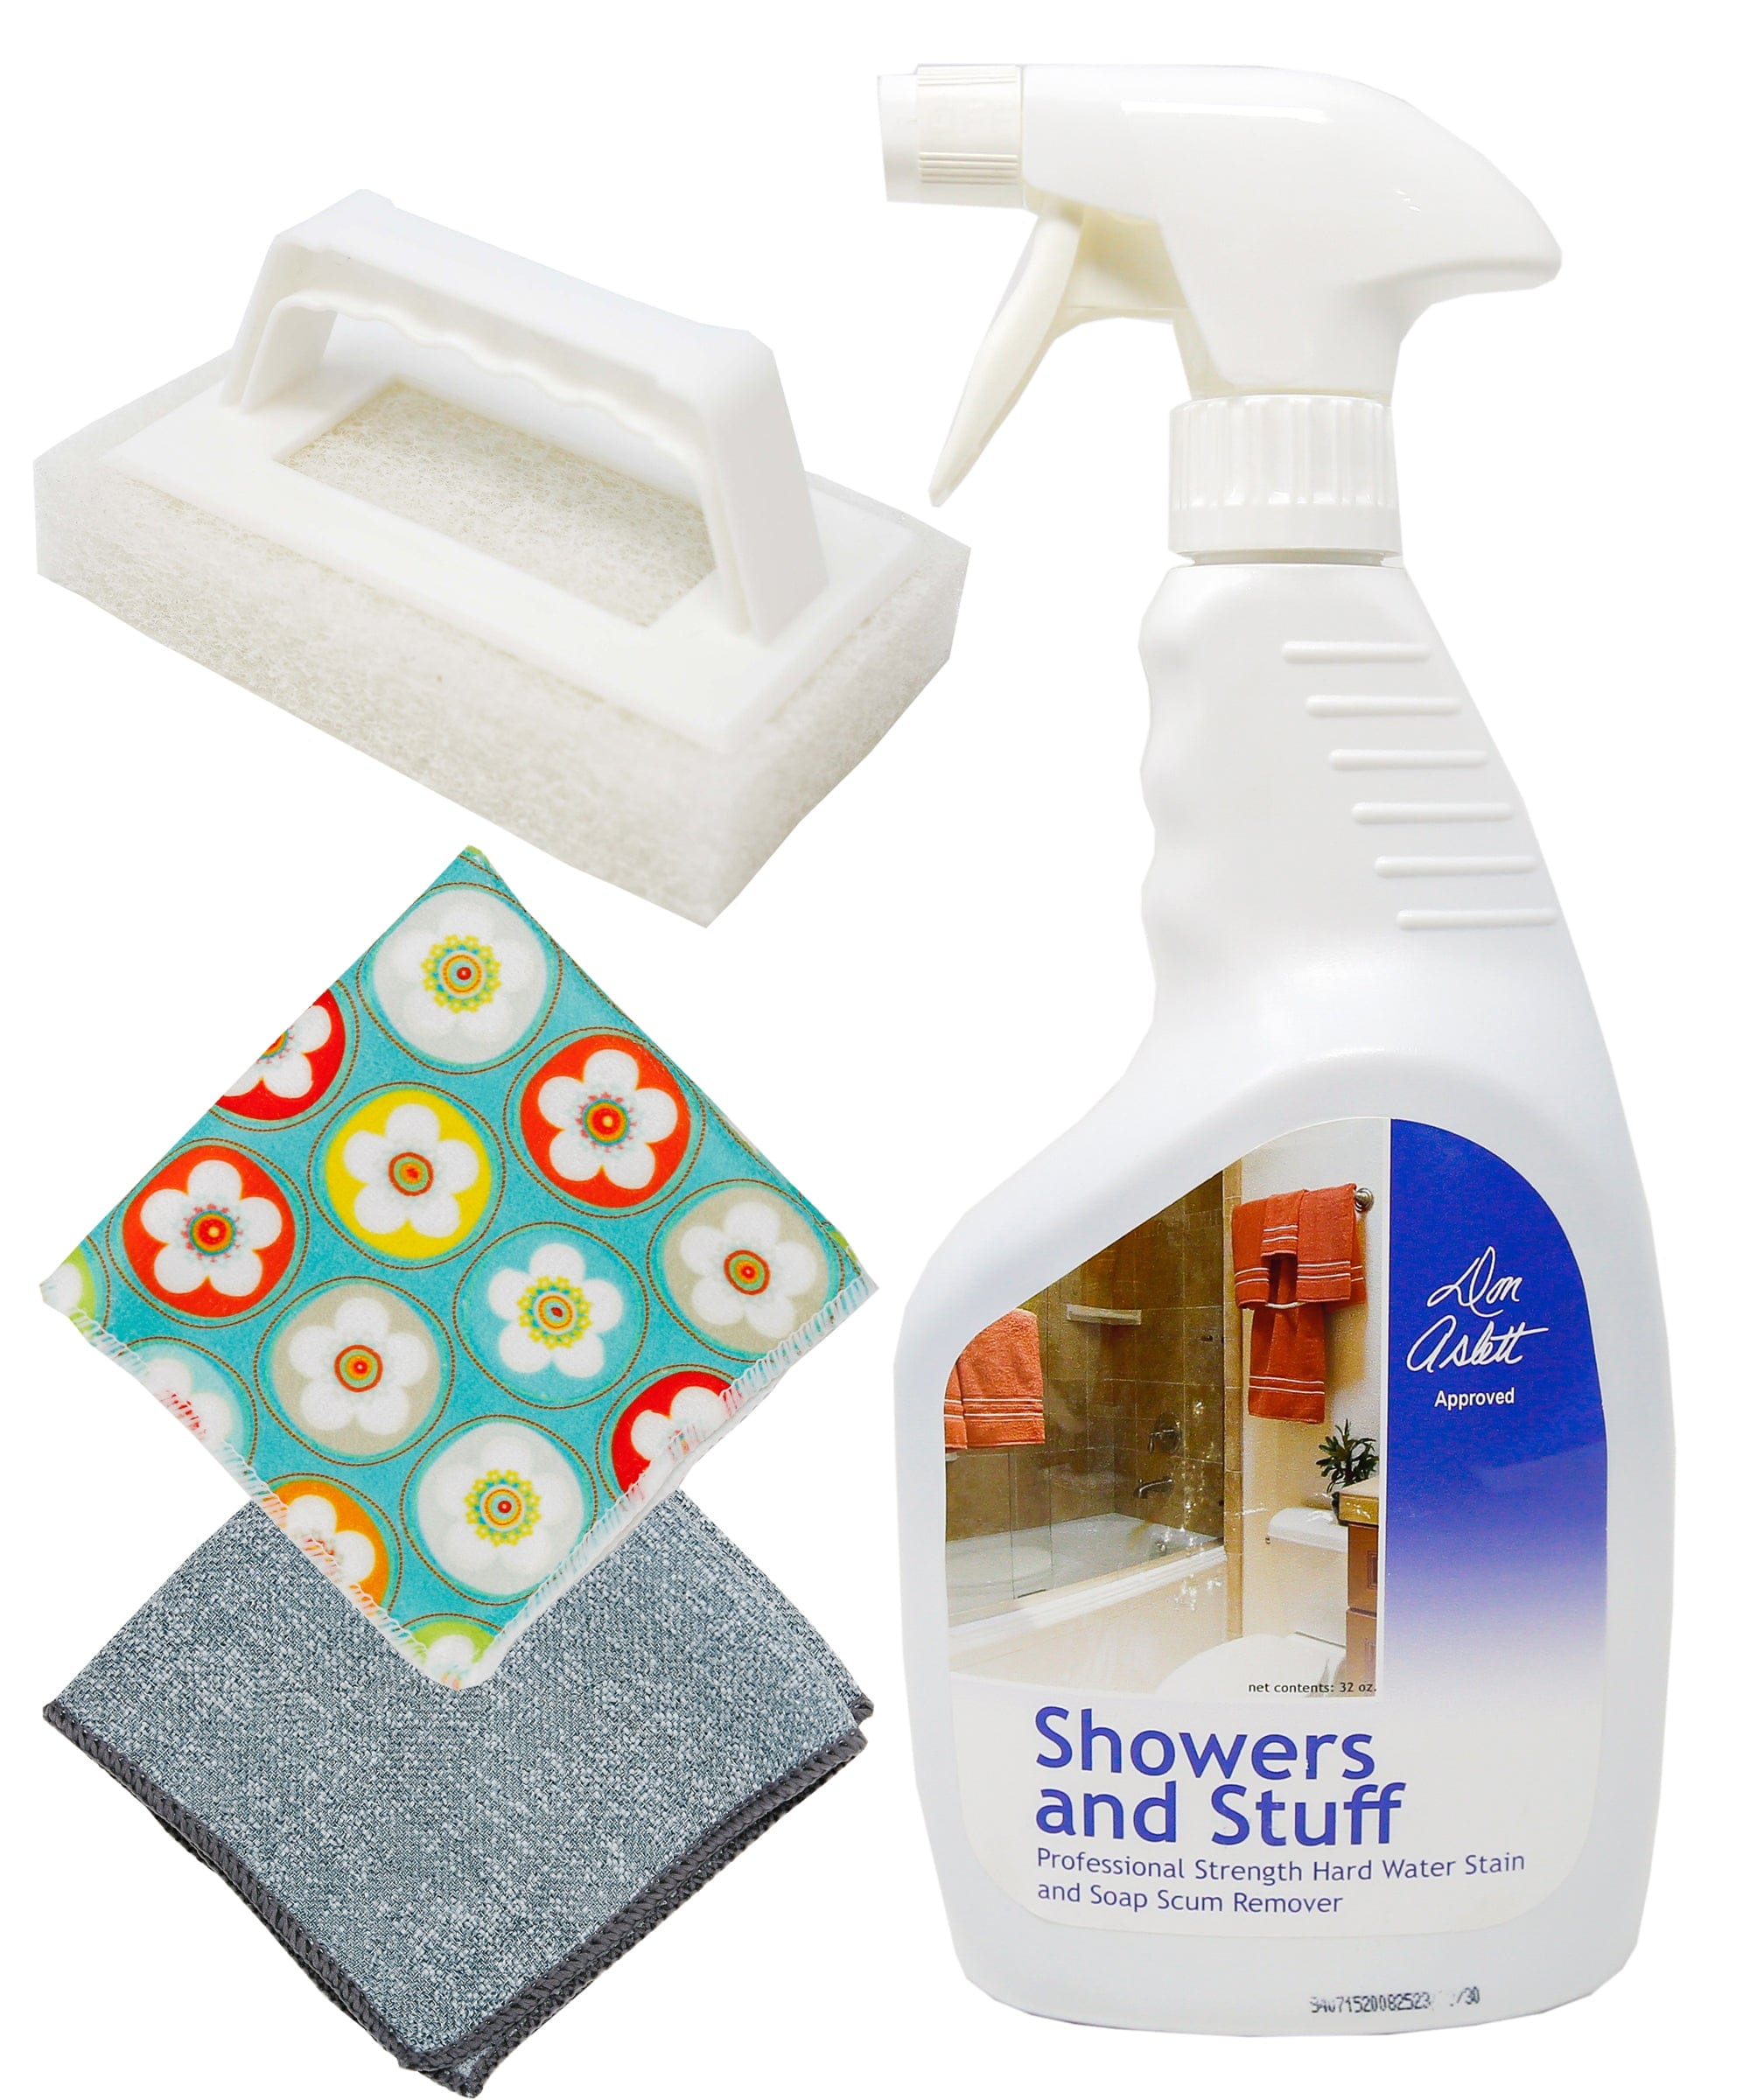 Don Aslett Showers & Stuff Starter Bundle - PROFESSIONAL STRENGTH HARD  WATER STAIN AND SOAP SCUM REMOVER